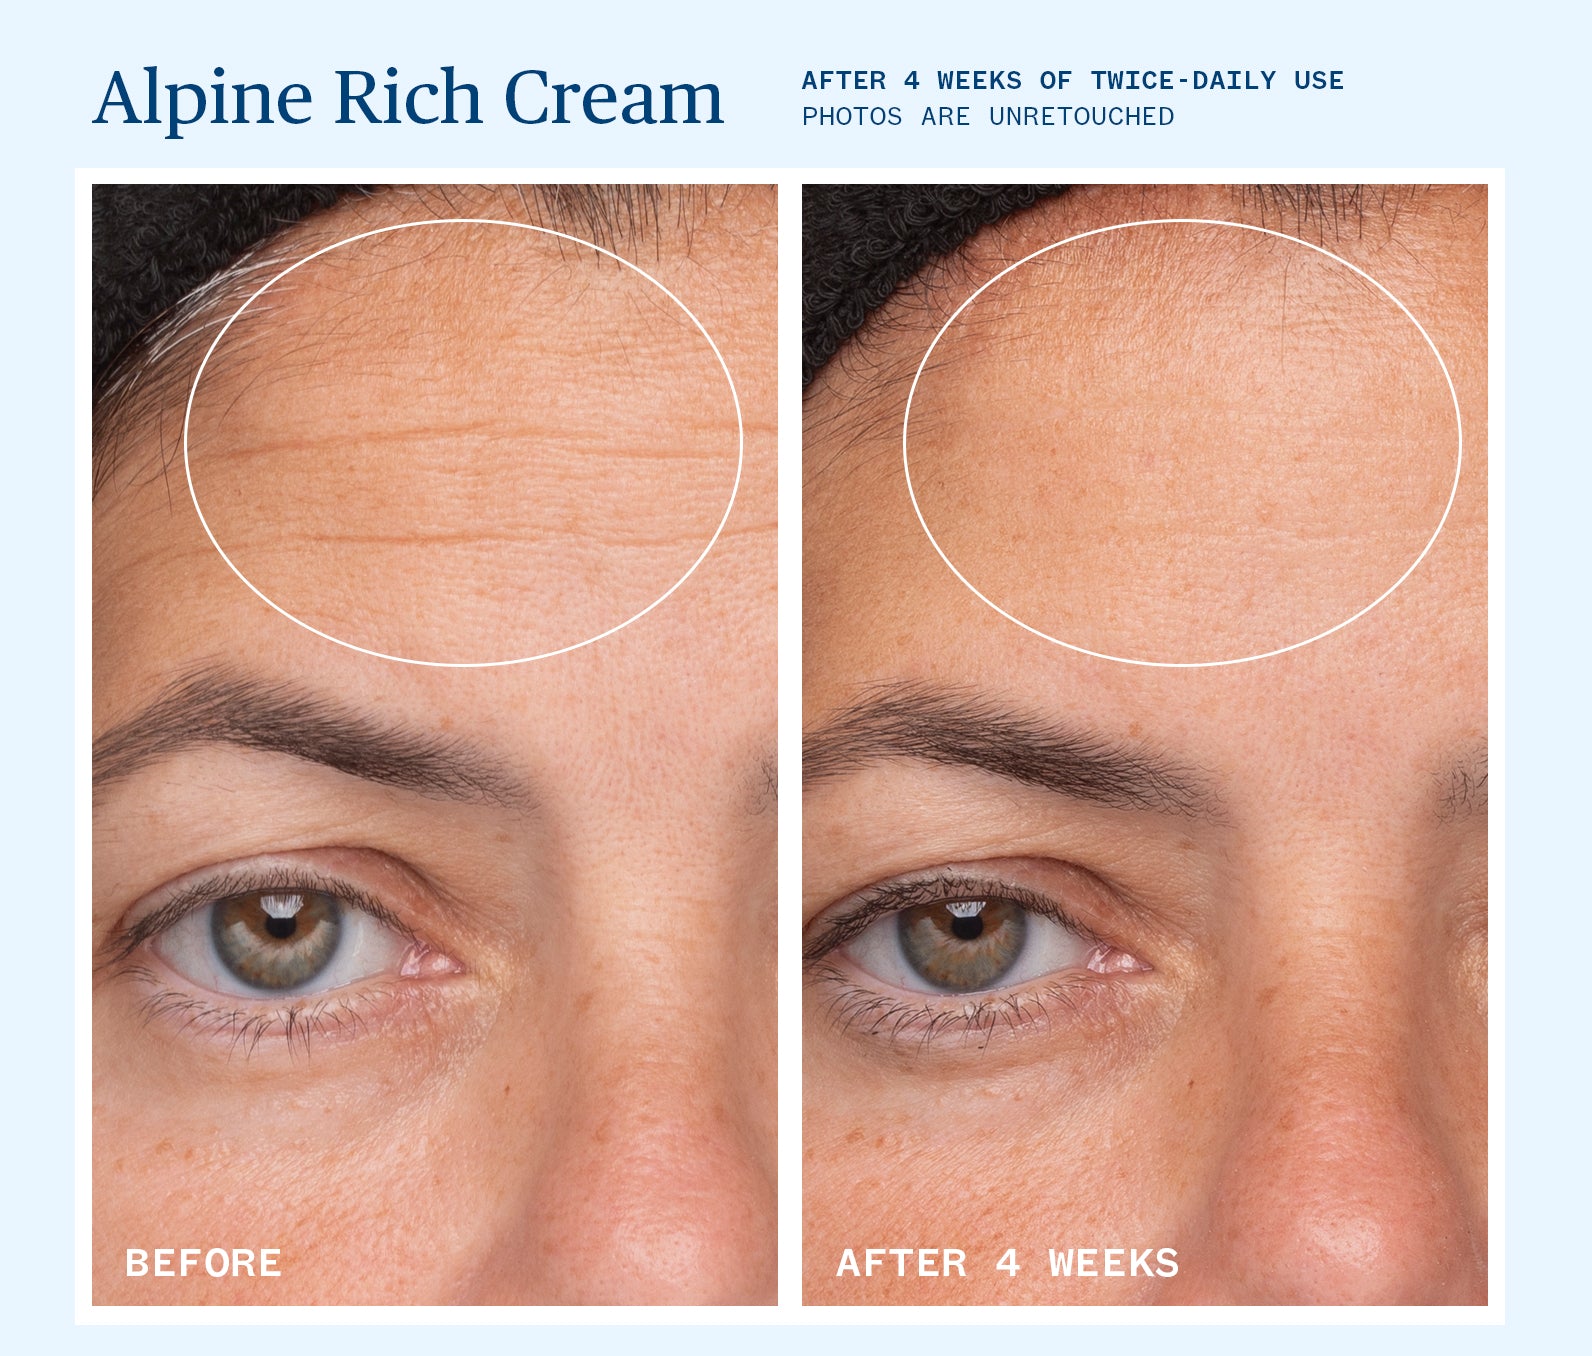 Alpine Rich Cream Before & After after 4 weeks